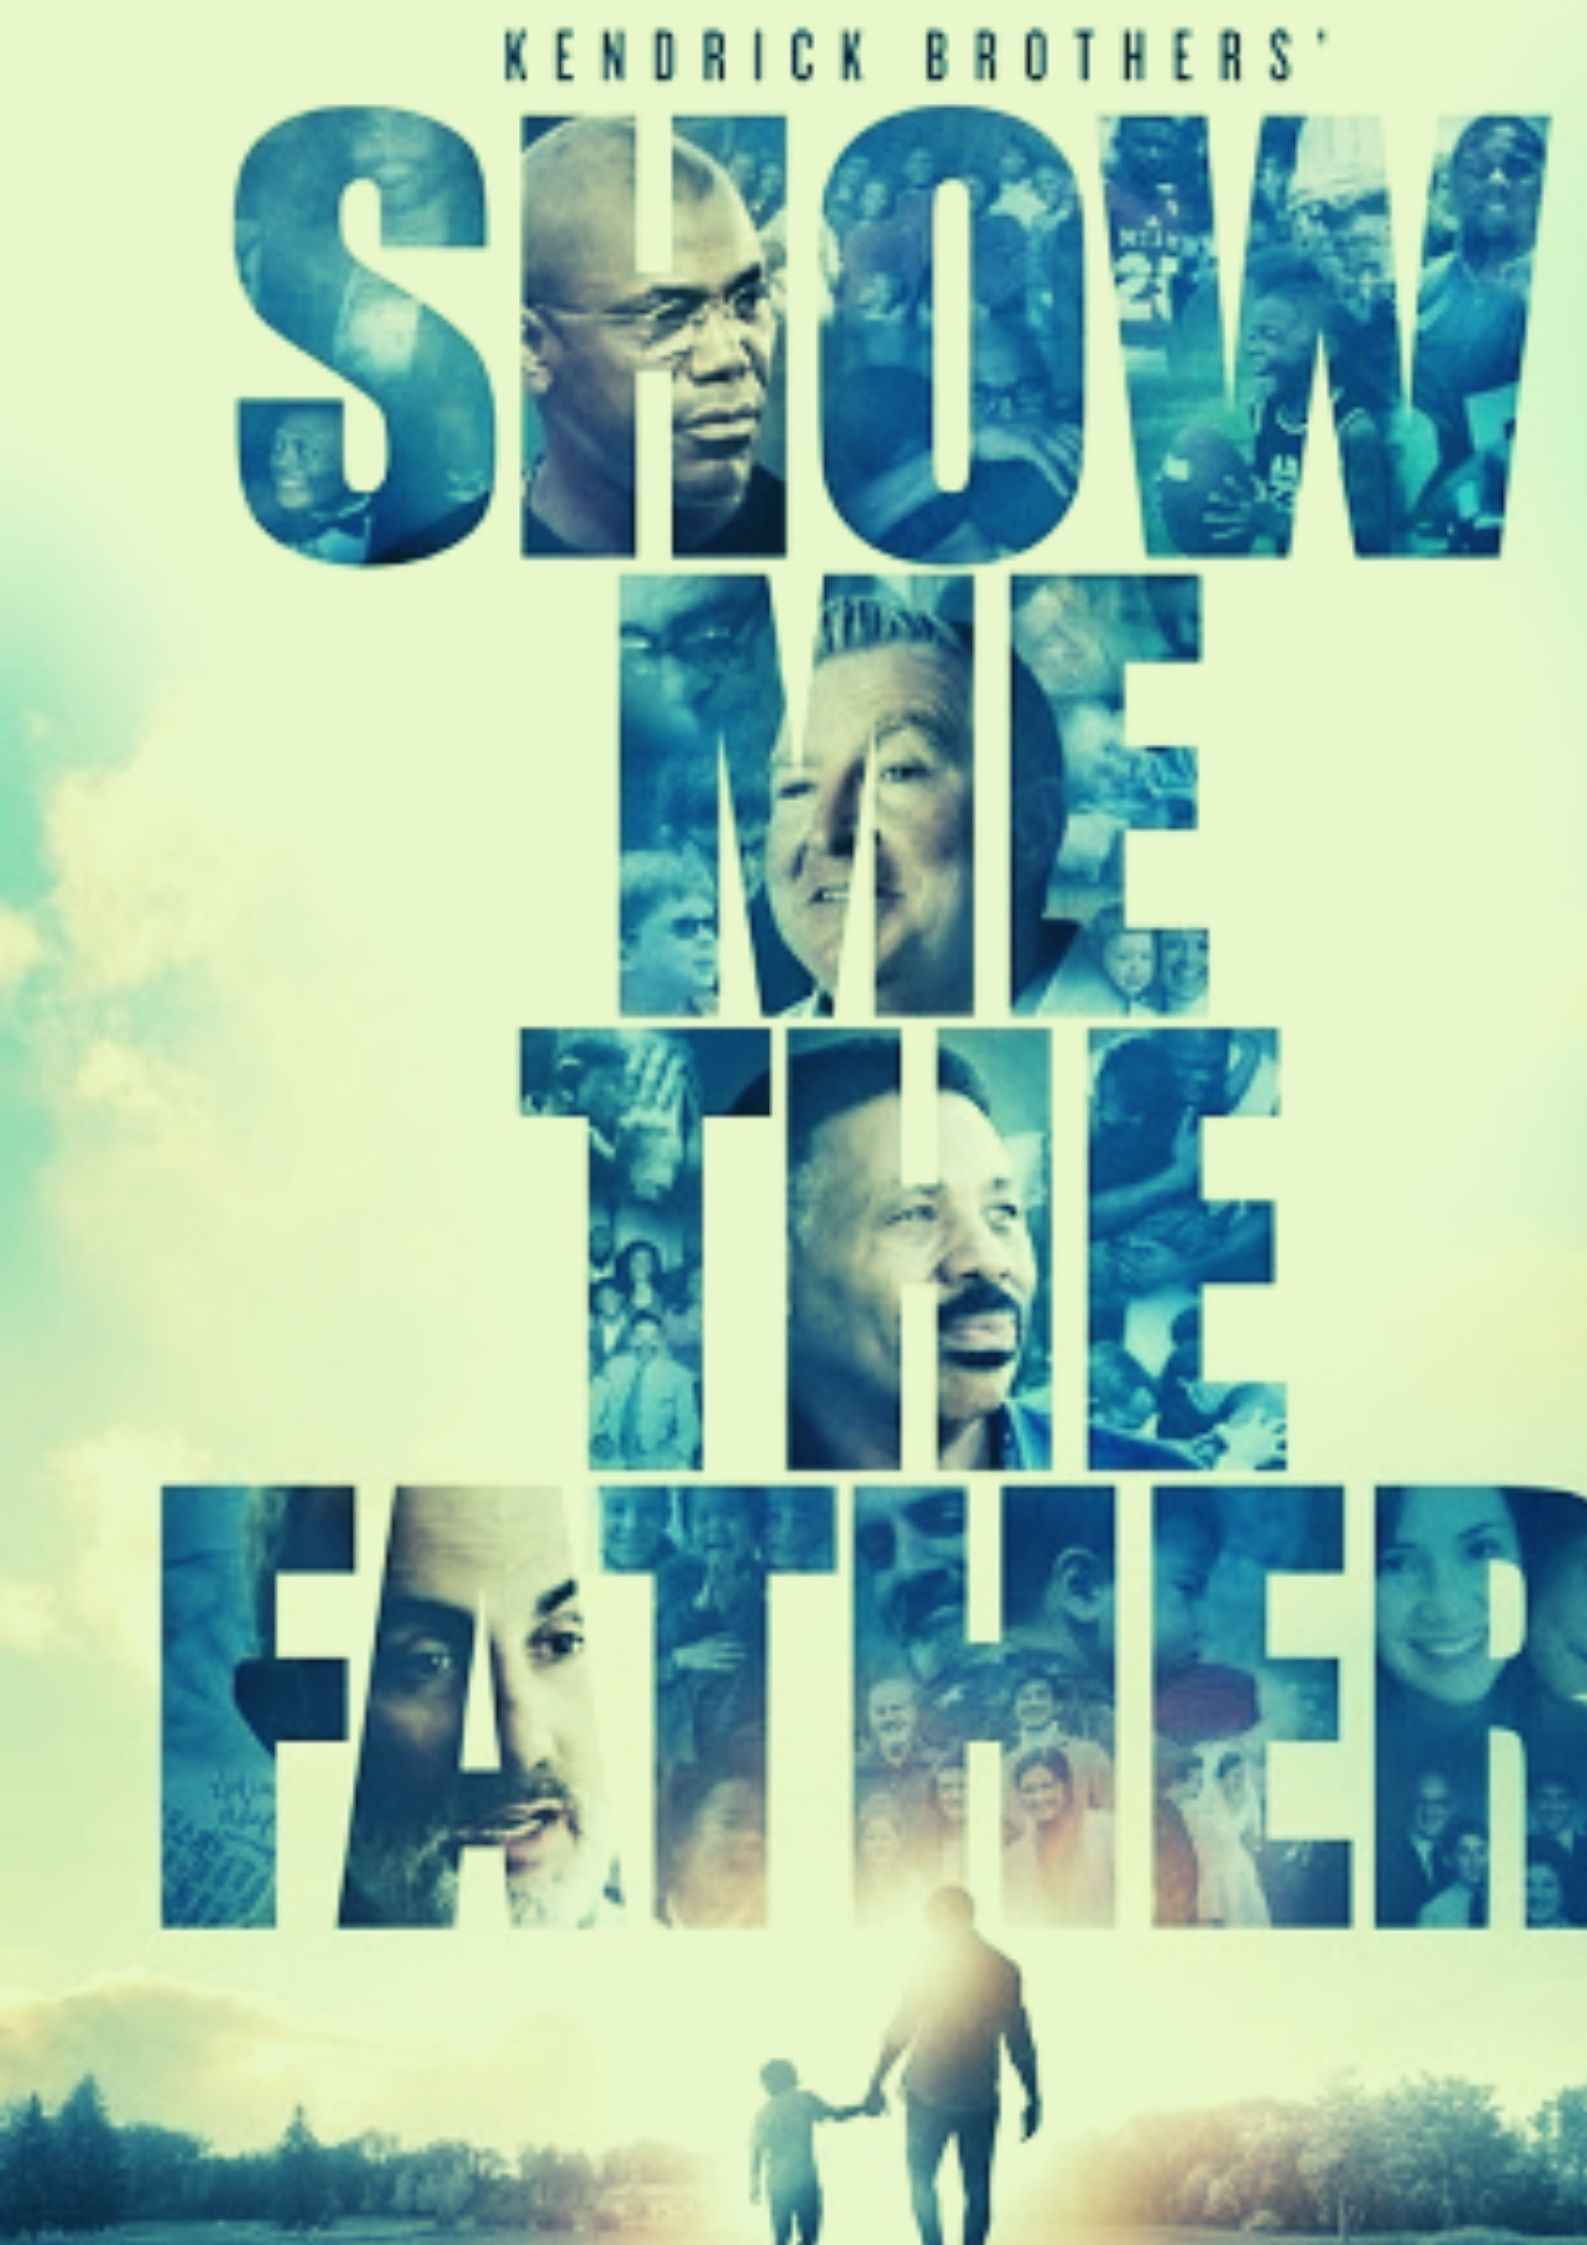 Show Me the Father Parents Guide | Show Me the FatherAge Rating 2021 Movie